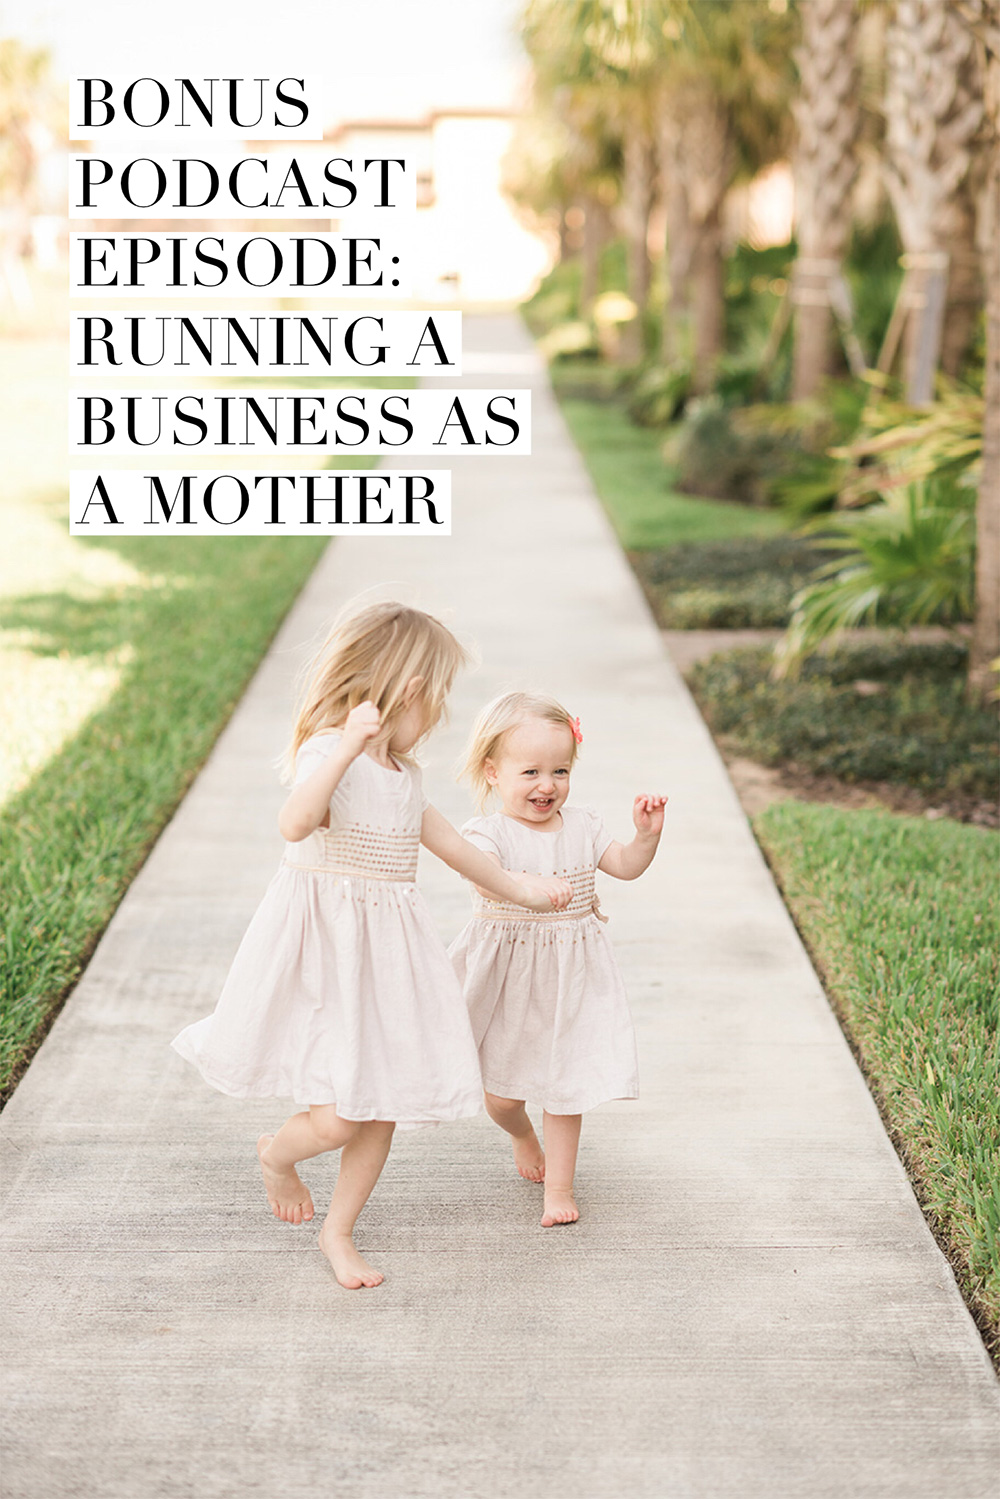 Bonus photo podcast episode: Running a photography business as a mother